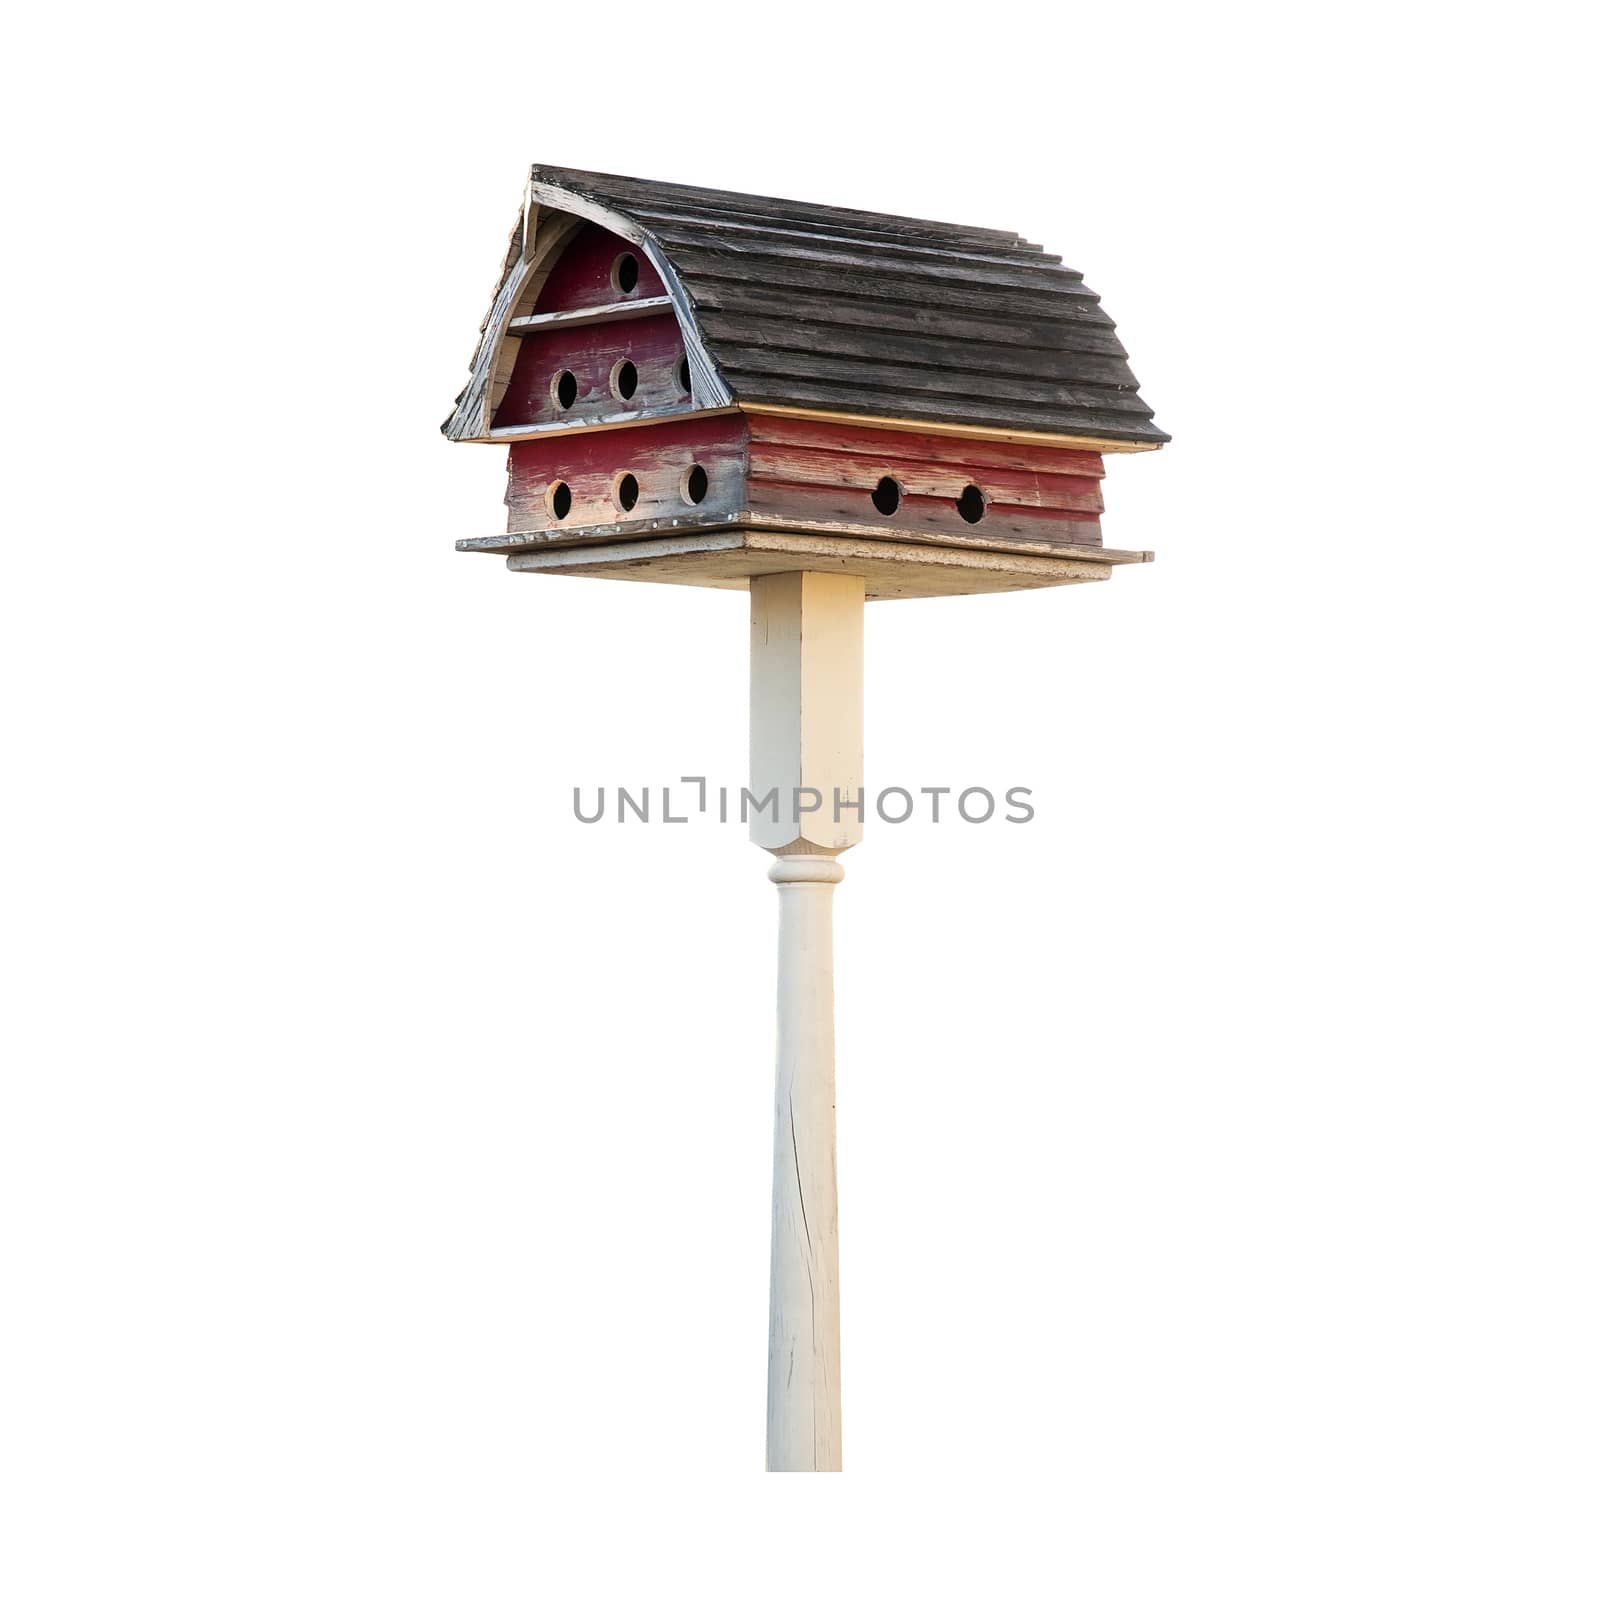 Bird House With Gambrel Roof by rcarner